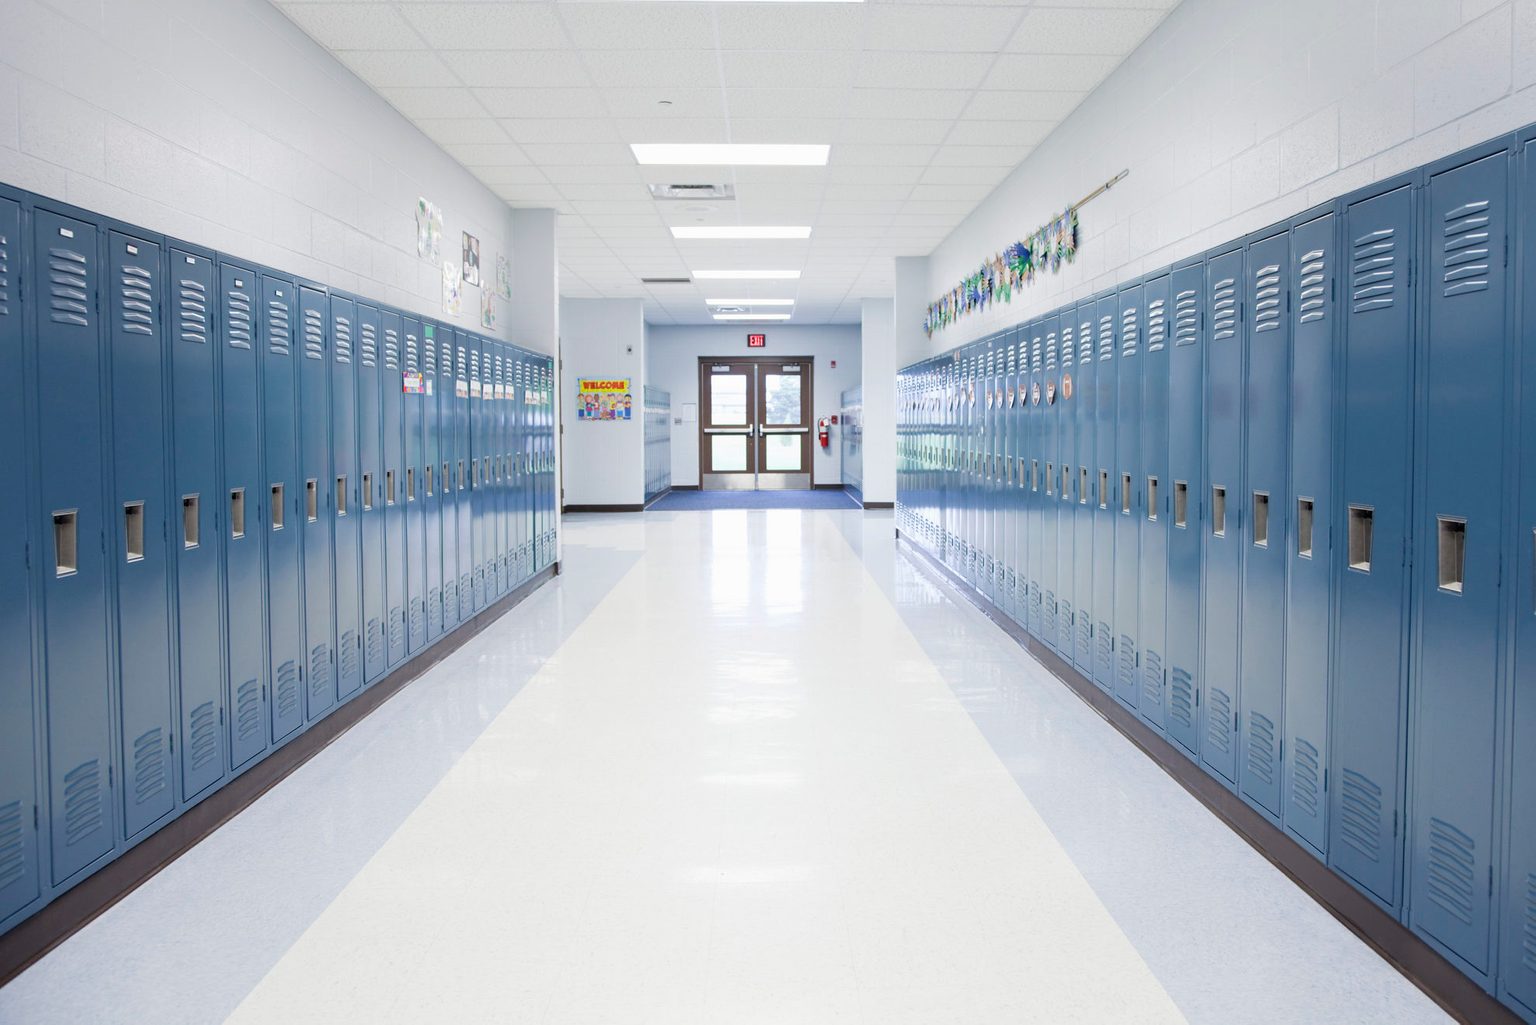 Things You May Not See in Schools After Coronavirus | Reader's Digest